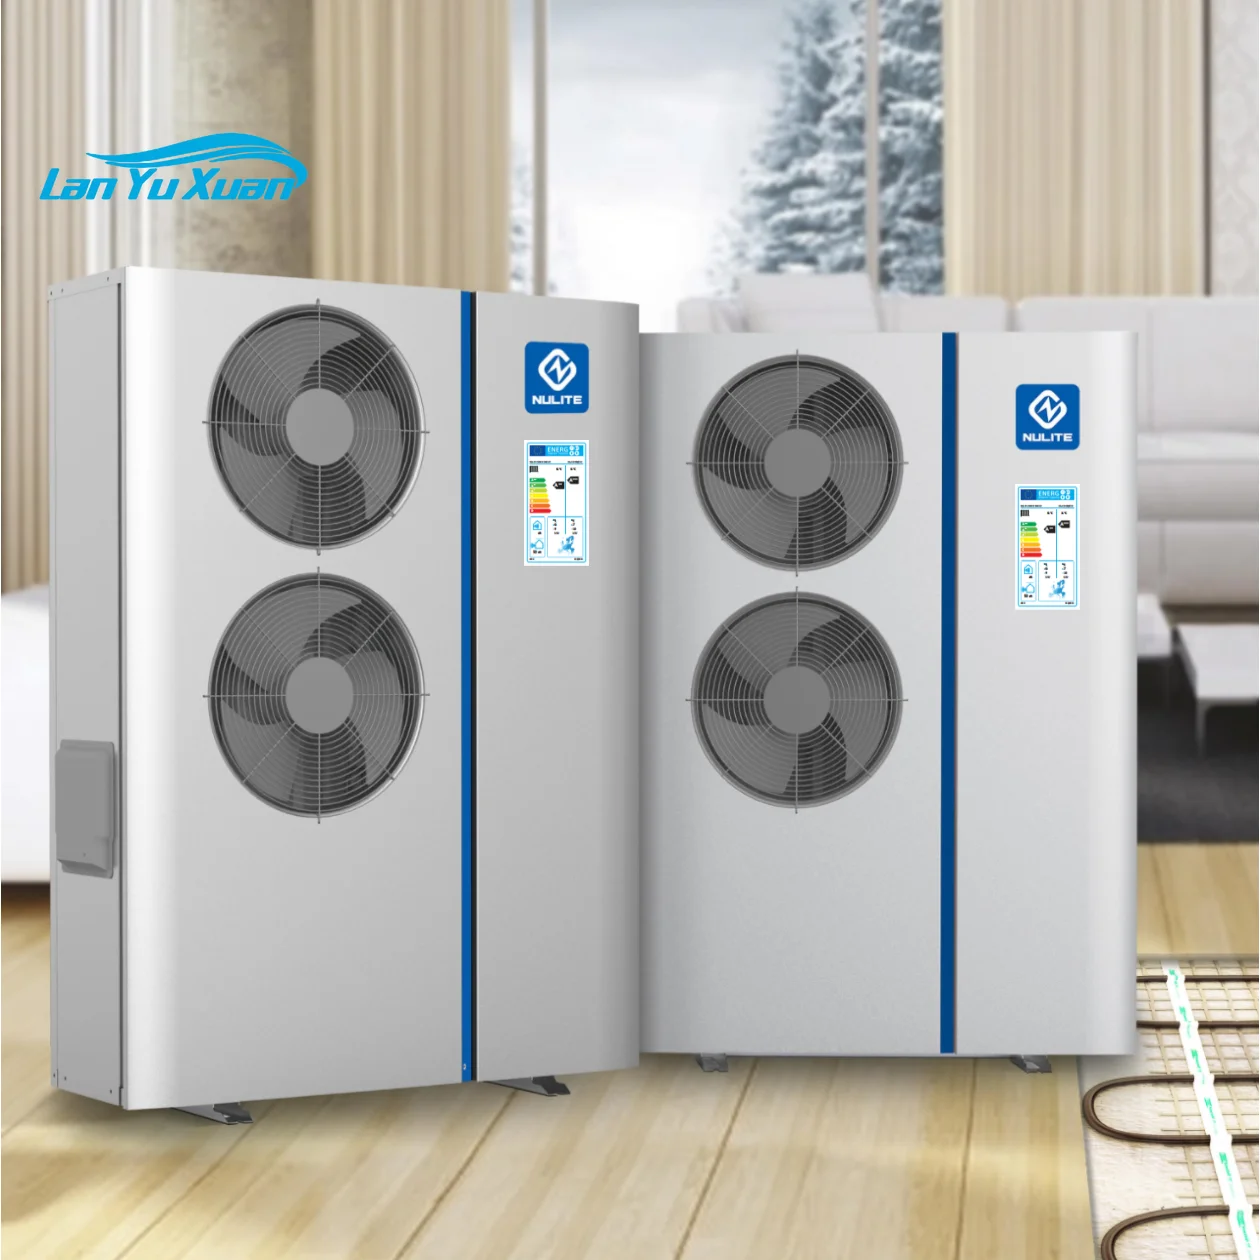 

China Wholesale Poland Pompa Ciepla Air Source Heatpump Factory NuLite B245 345 R32 DC Inverter Air to Water Heat Pump